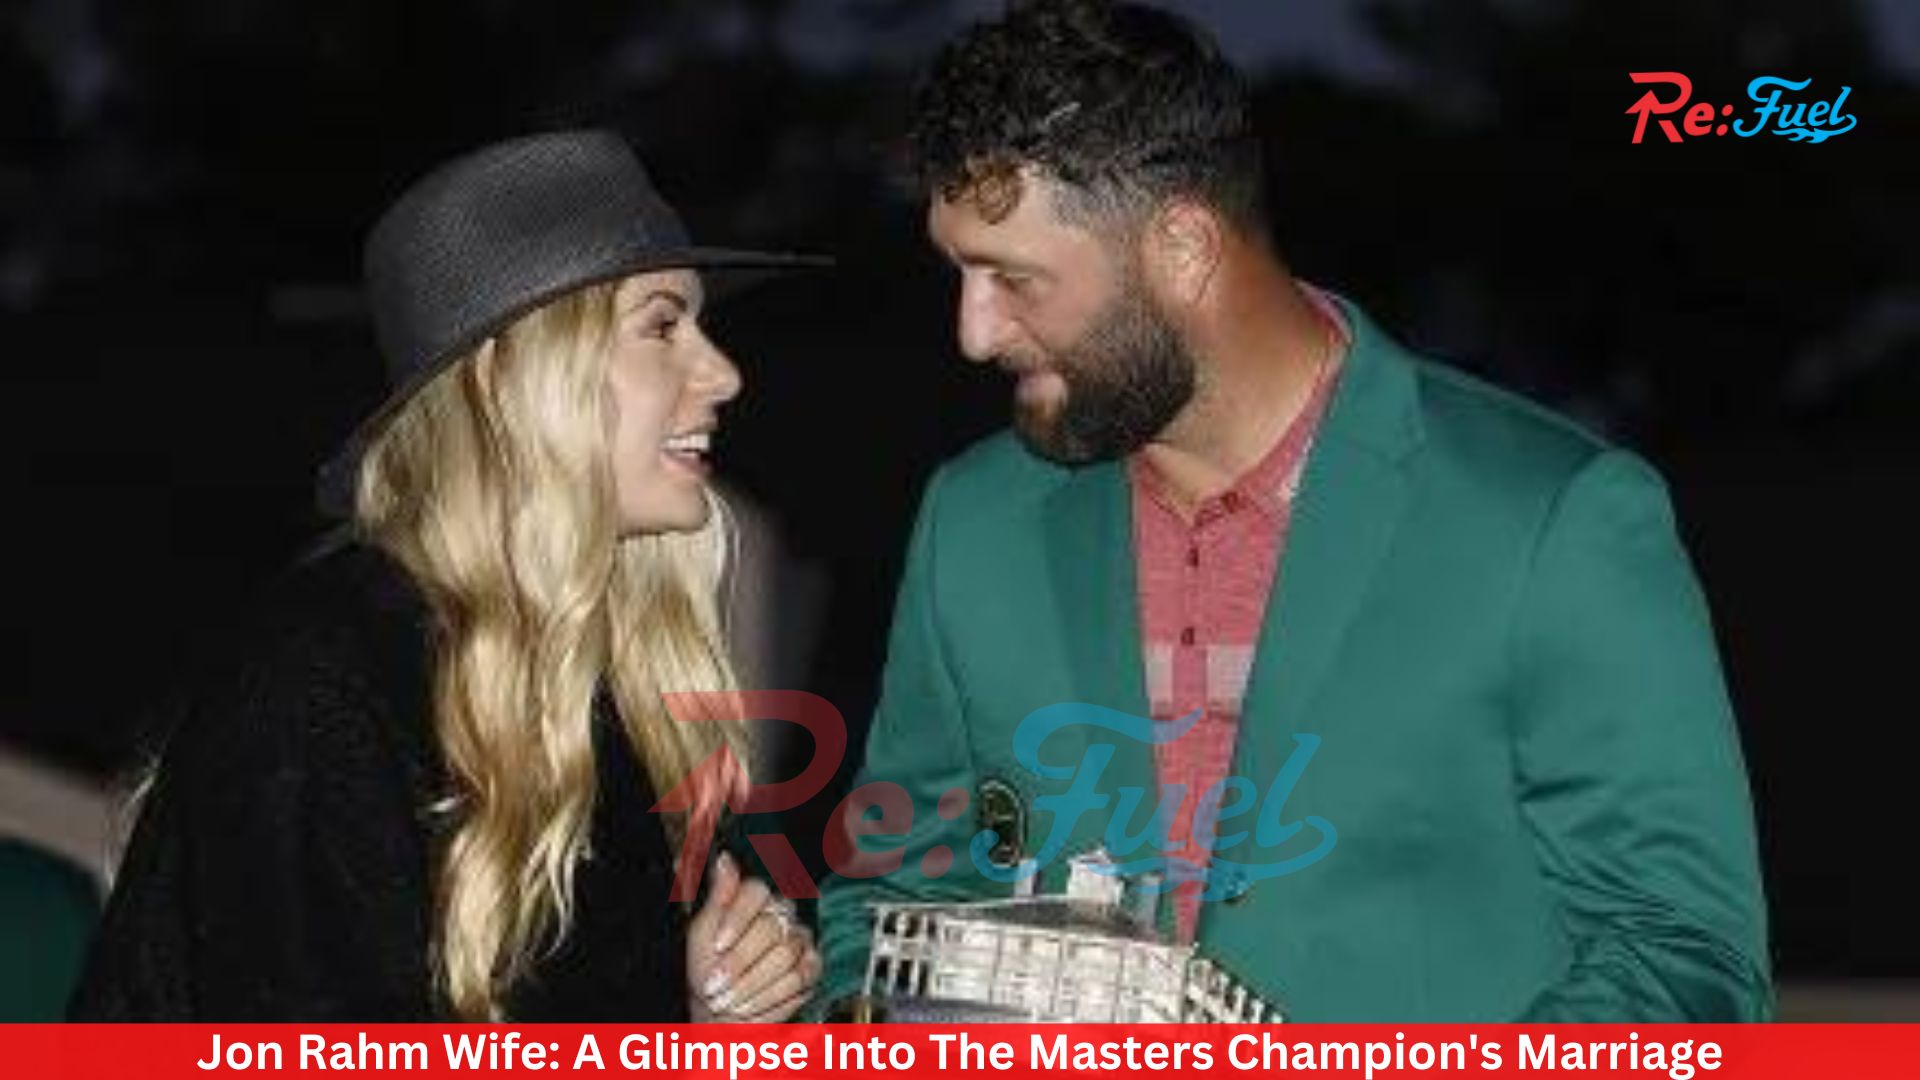 Jon Rahm Wife: A Glimpse Into The Masters Champion's Marriage